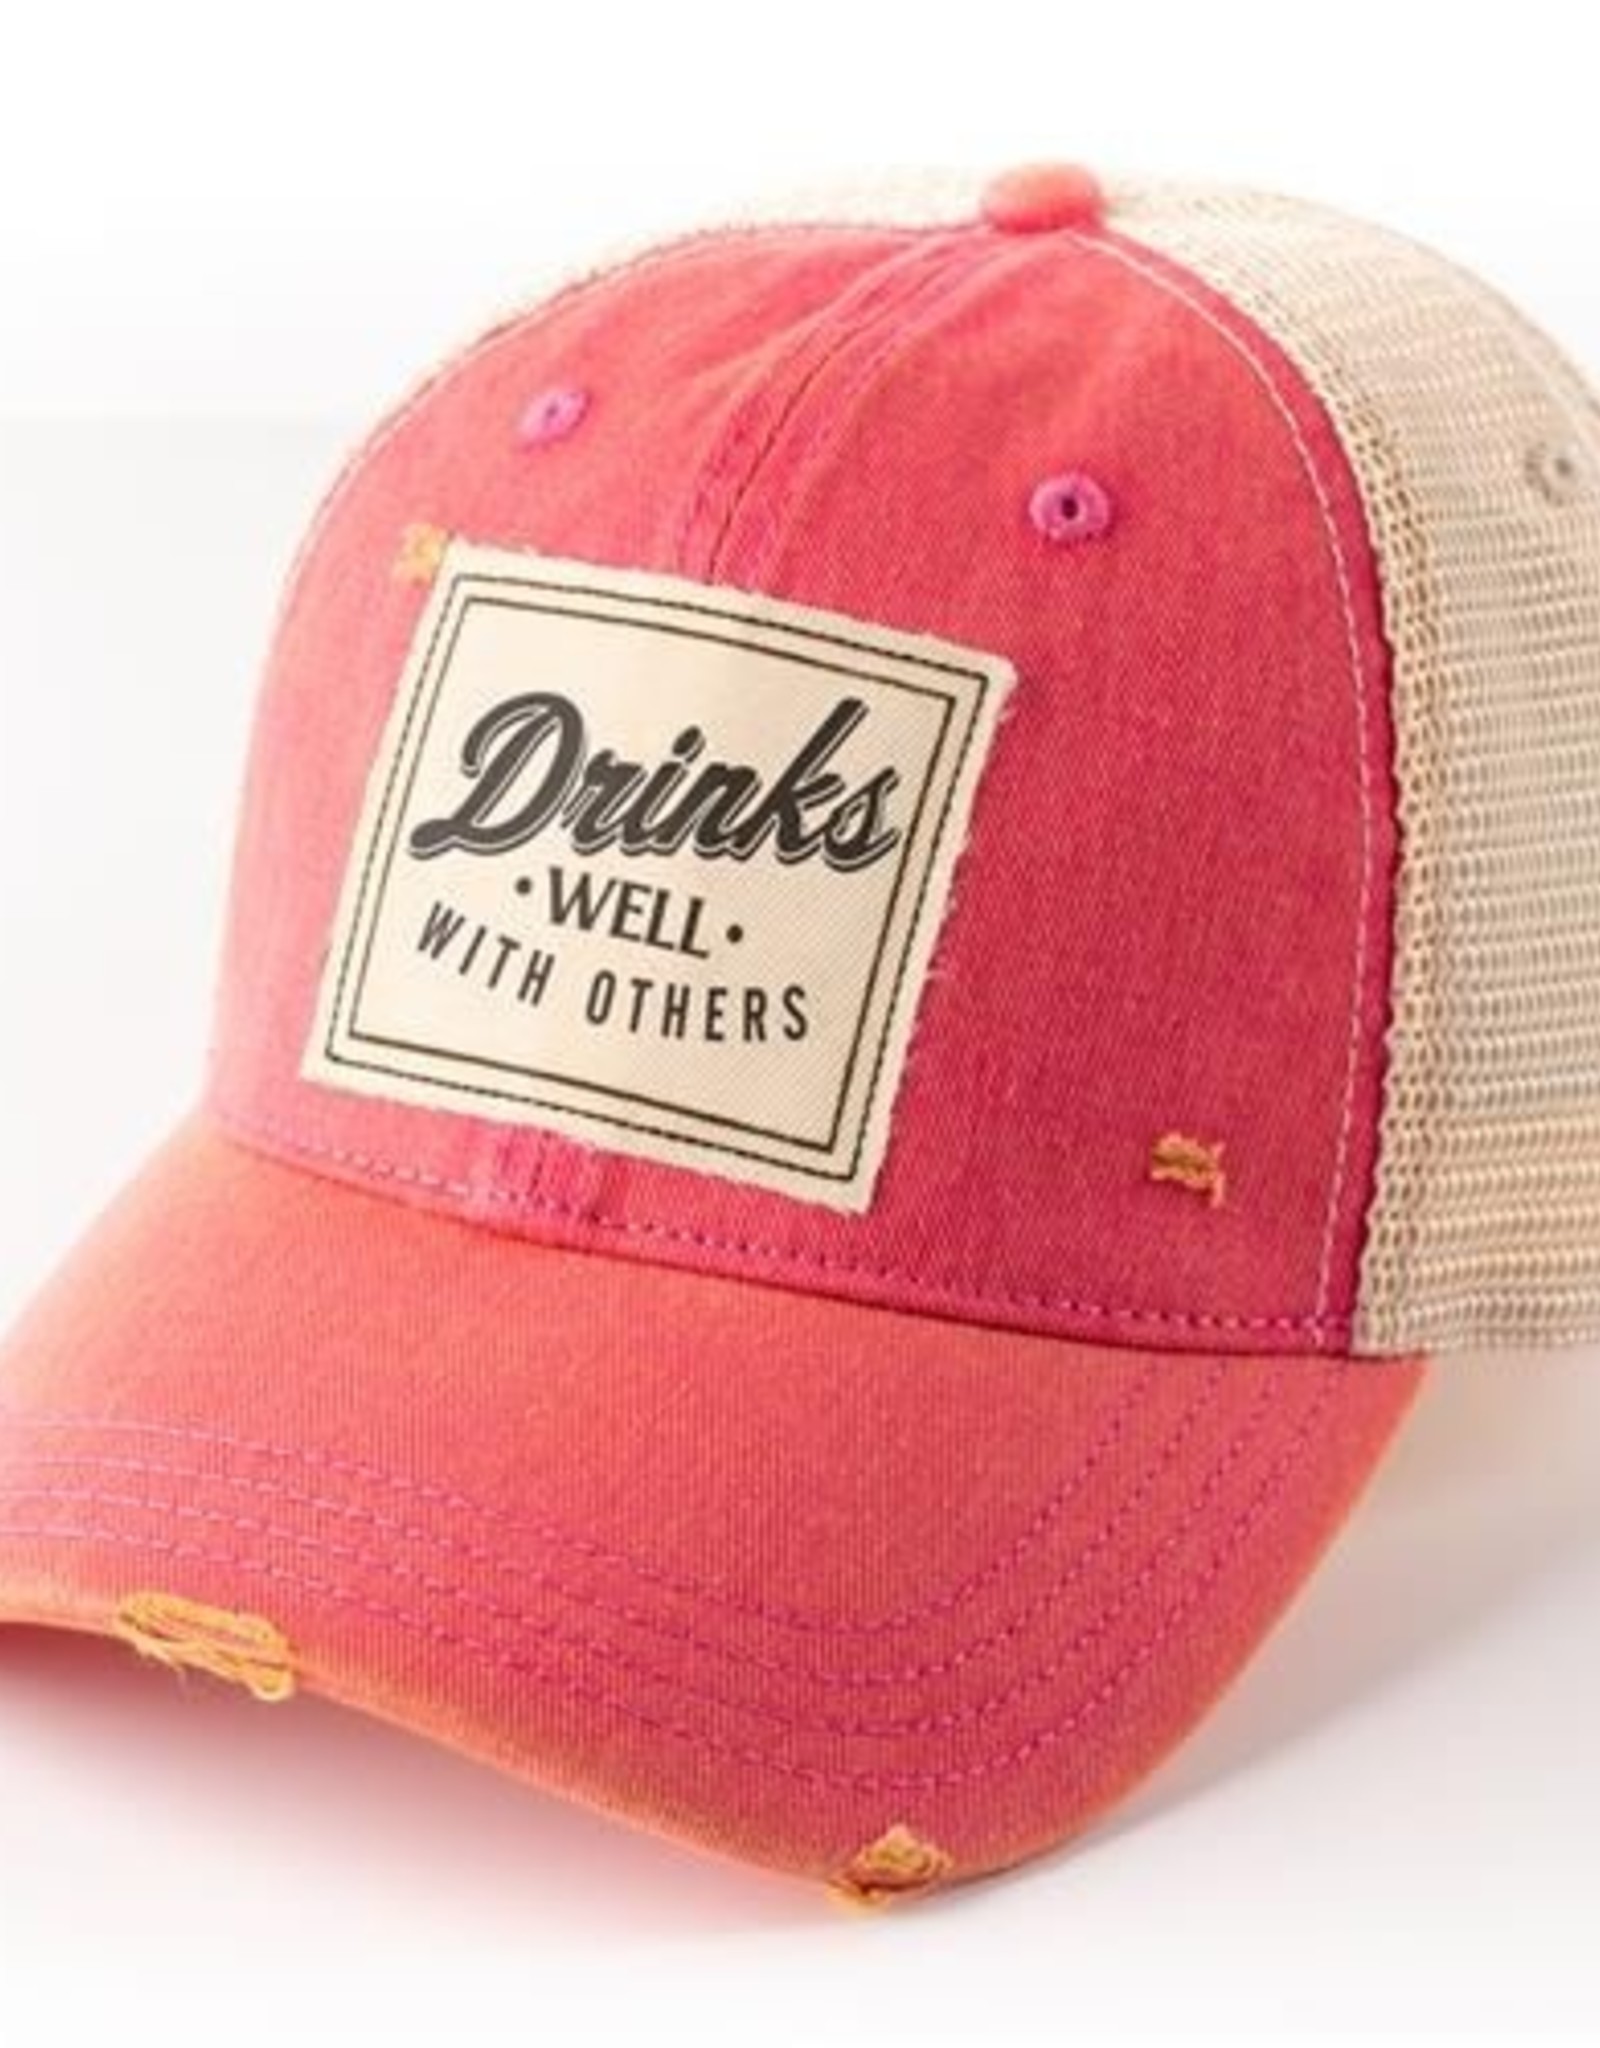 Trucker Hat - Drinks Well with Others